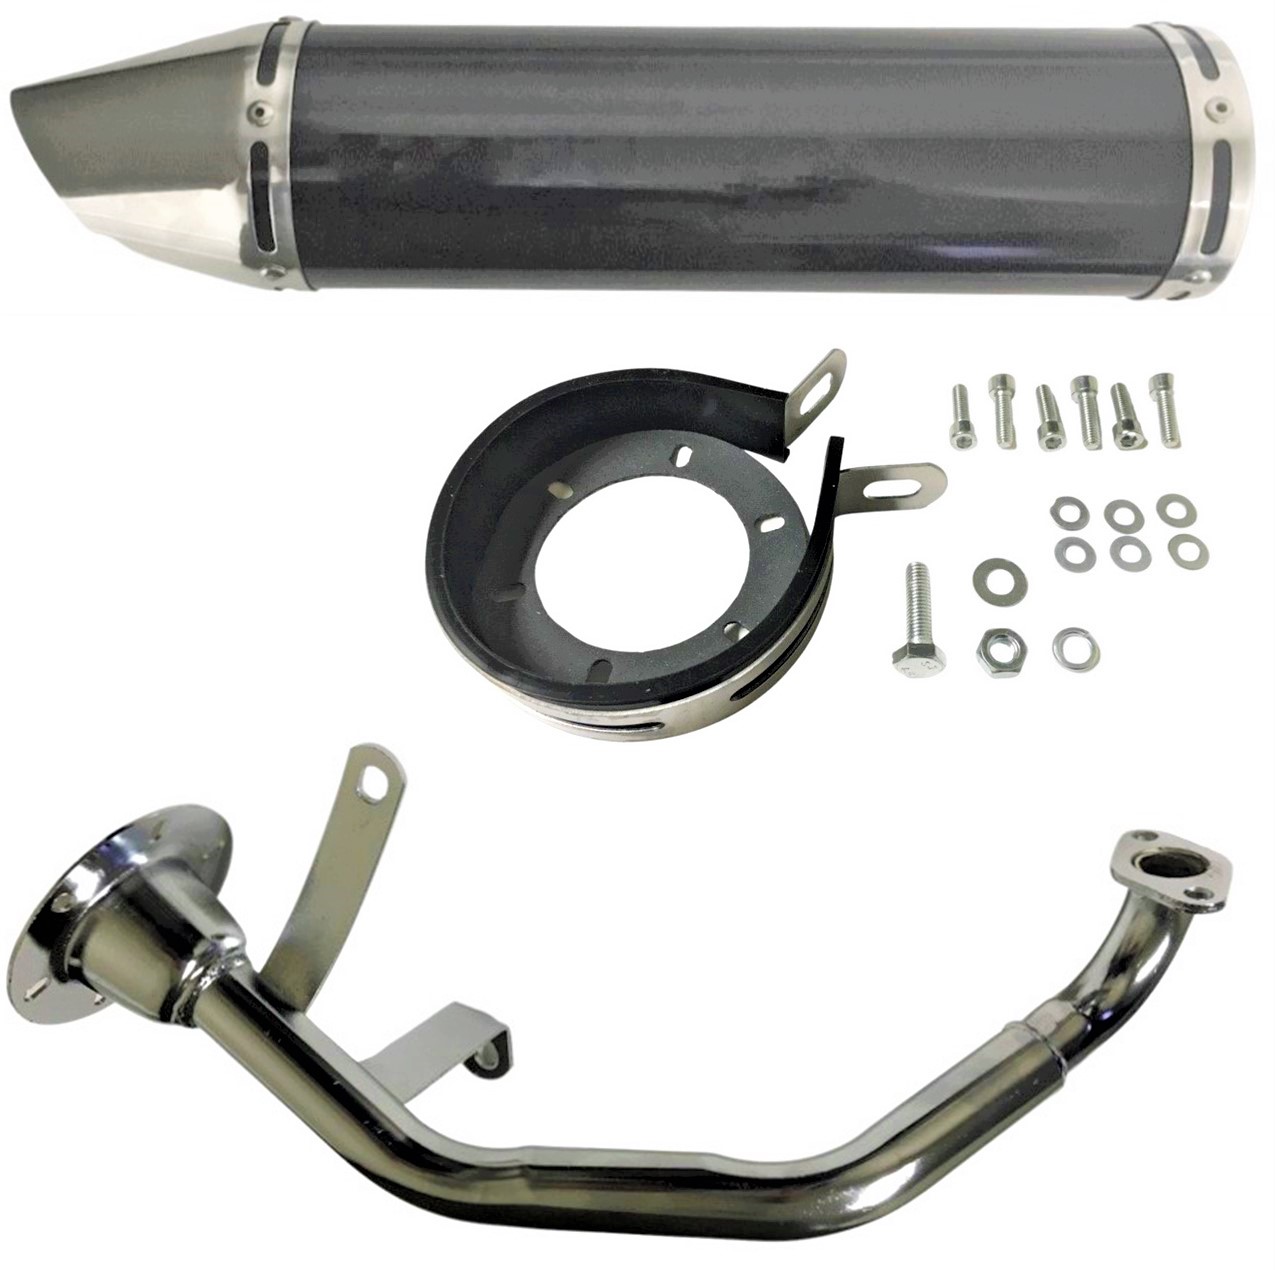 Exhaust Pipe HIGH PERFORMANCE - BLACK/CHROME Fits Most GY6-125, GY6-150 Chinese Scooters Canister L=44cm 17.50in. OD=10cm 4.0in